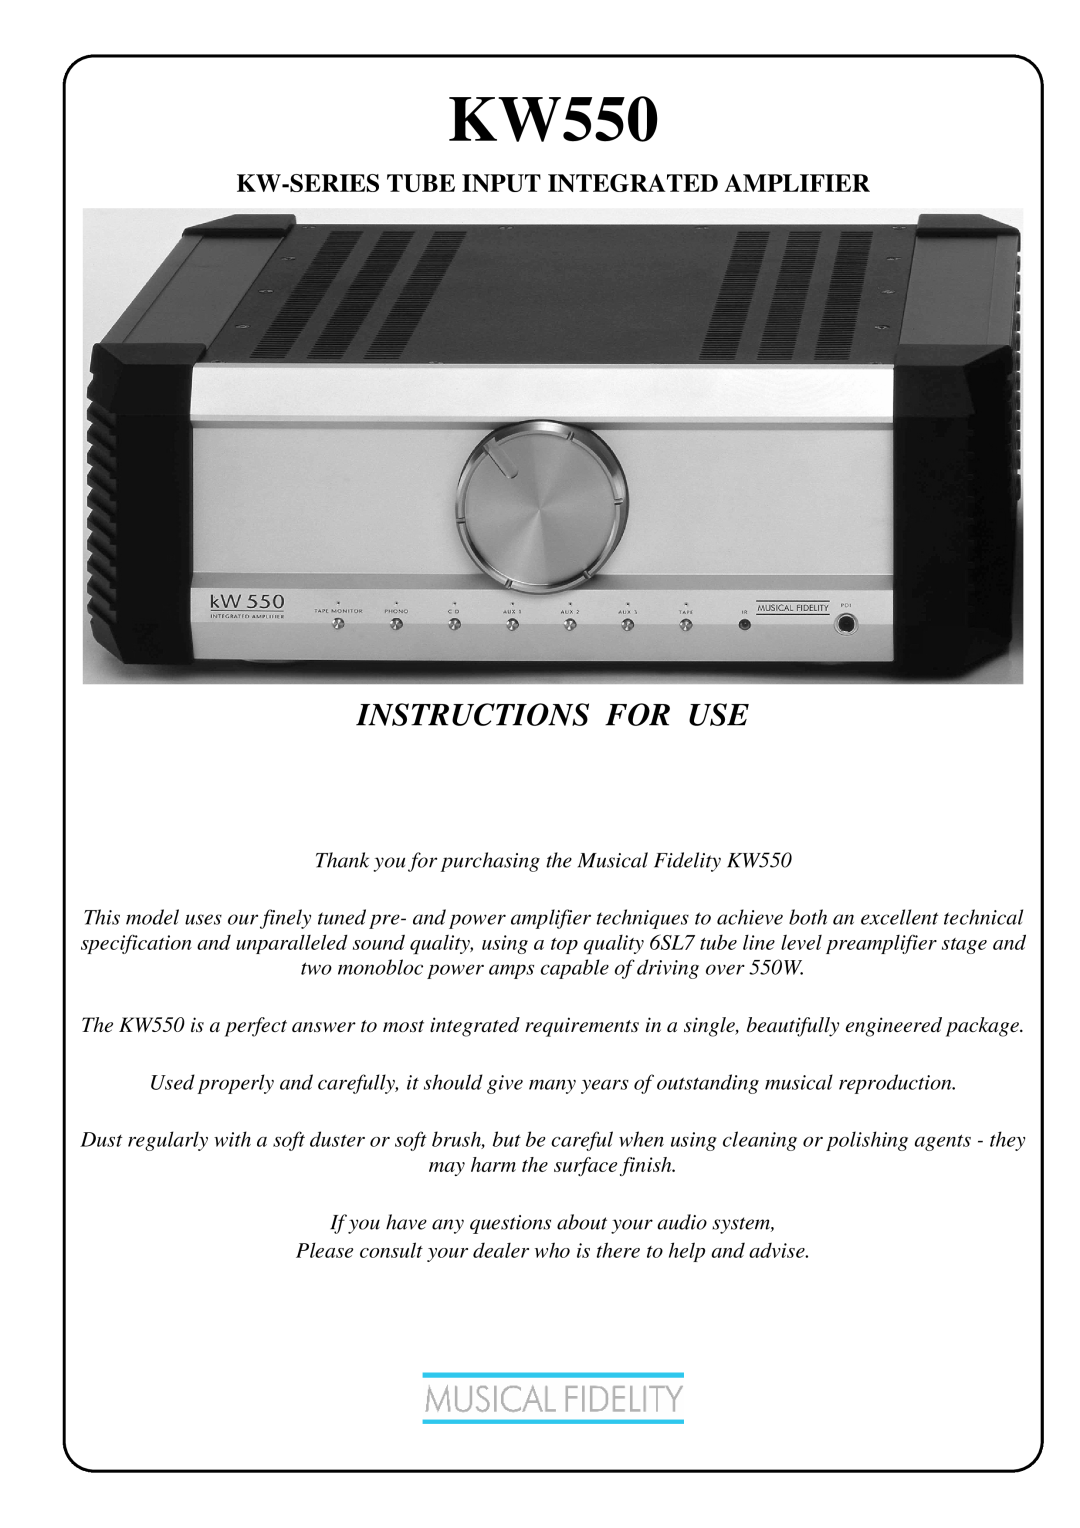 Musical Fidelity KW550 manual Instructions For Use, Kw-Seriestube Input Integrated Amplifier 